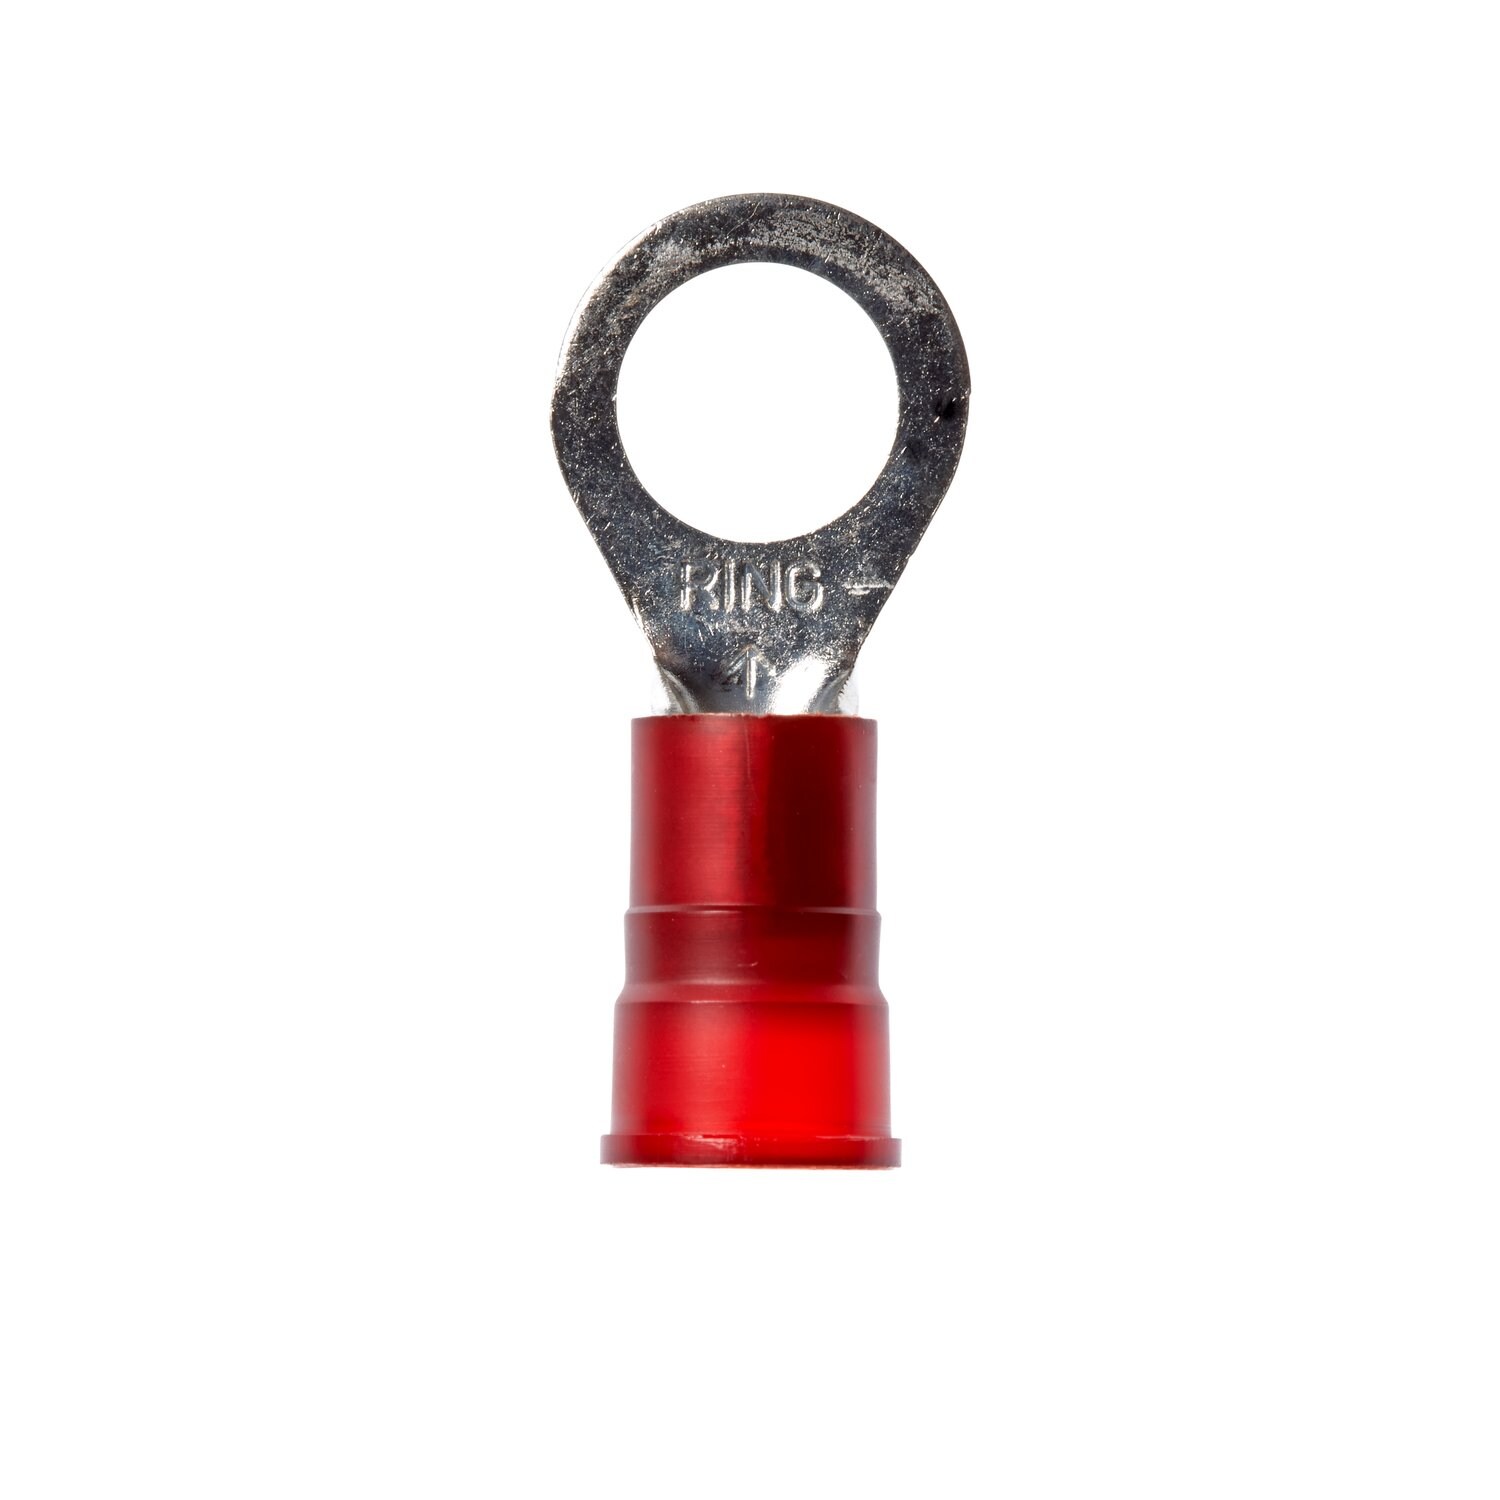 7010319713 - 3M Scotchlok Ring Nylon Insulated, 10/bottle, MN8-38RX, standard-style
ring tongue fits around the stud, 100/Case